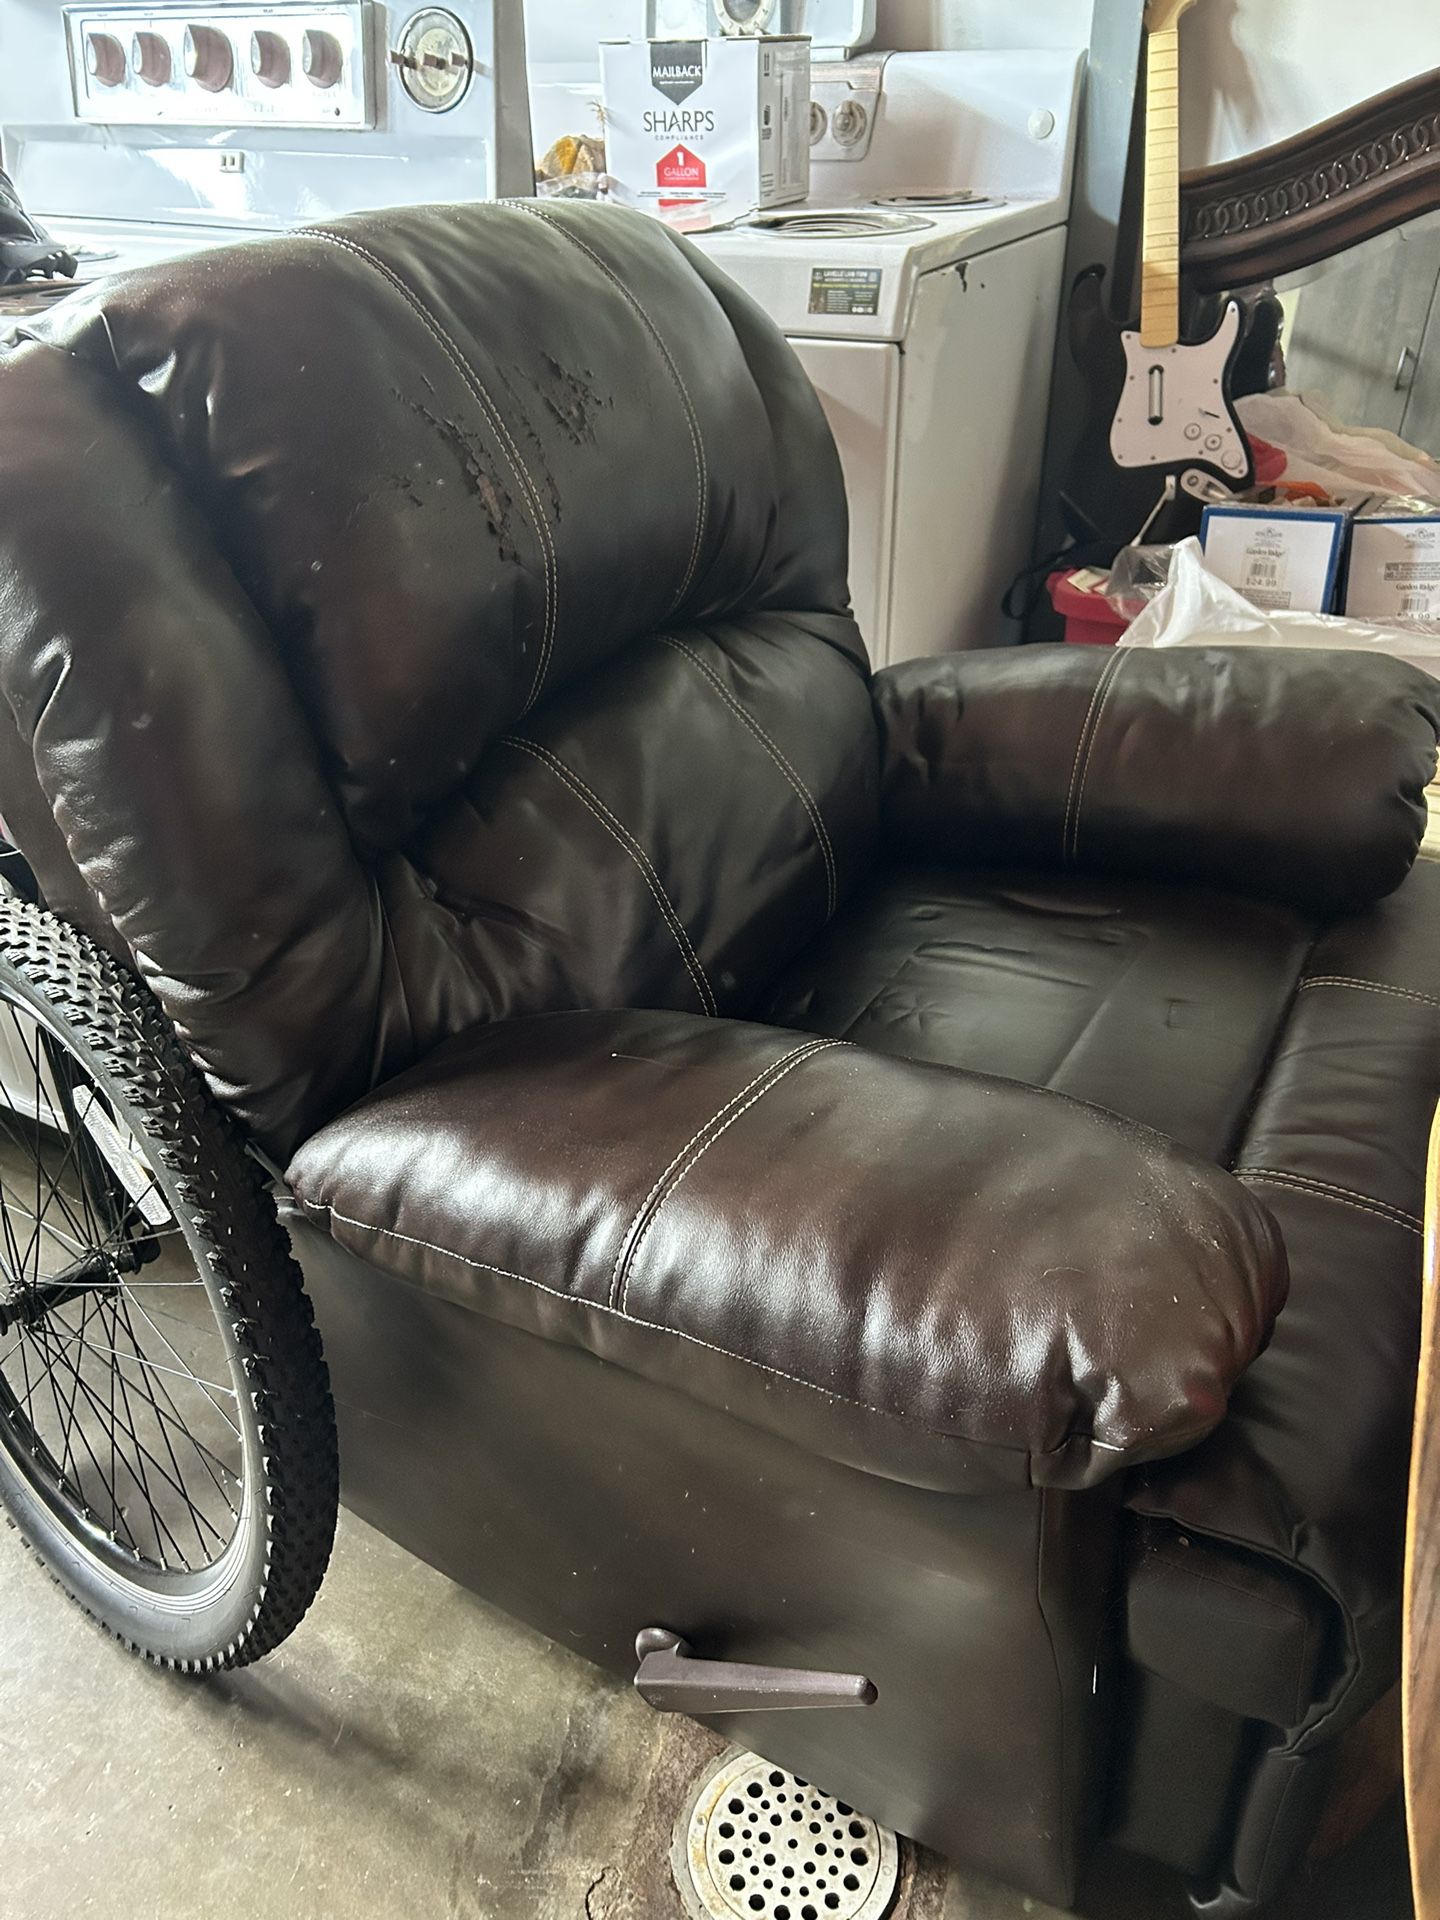 Gently Used Recliner